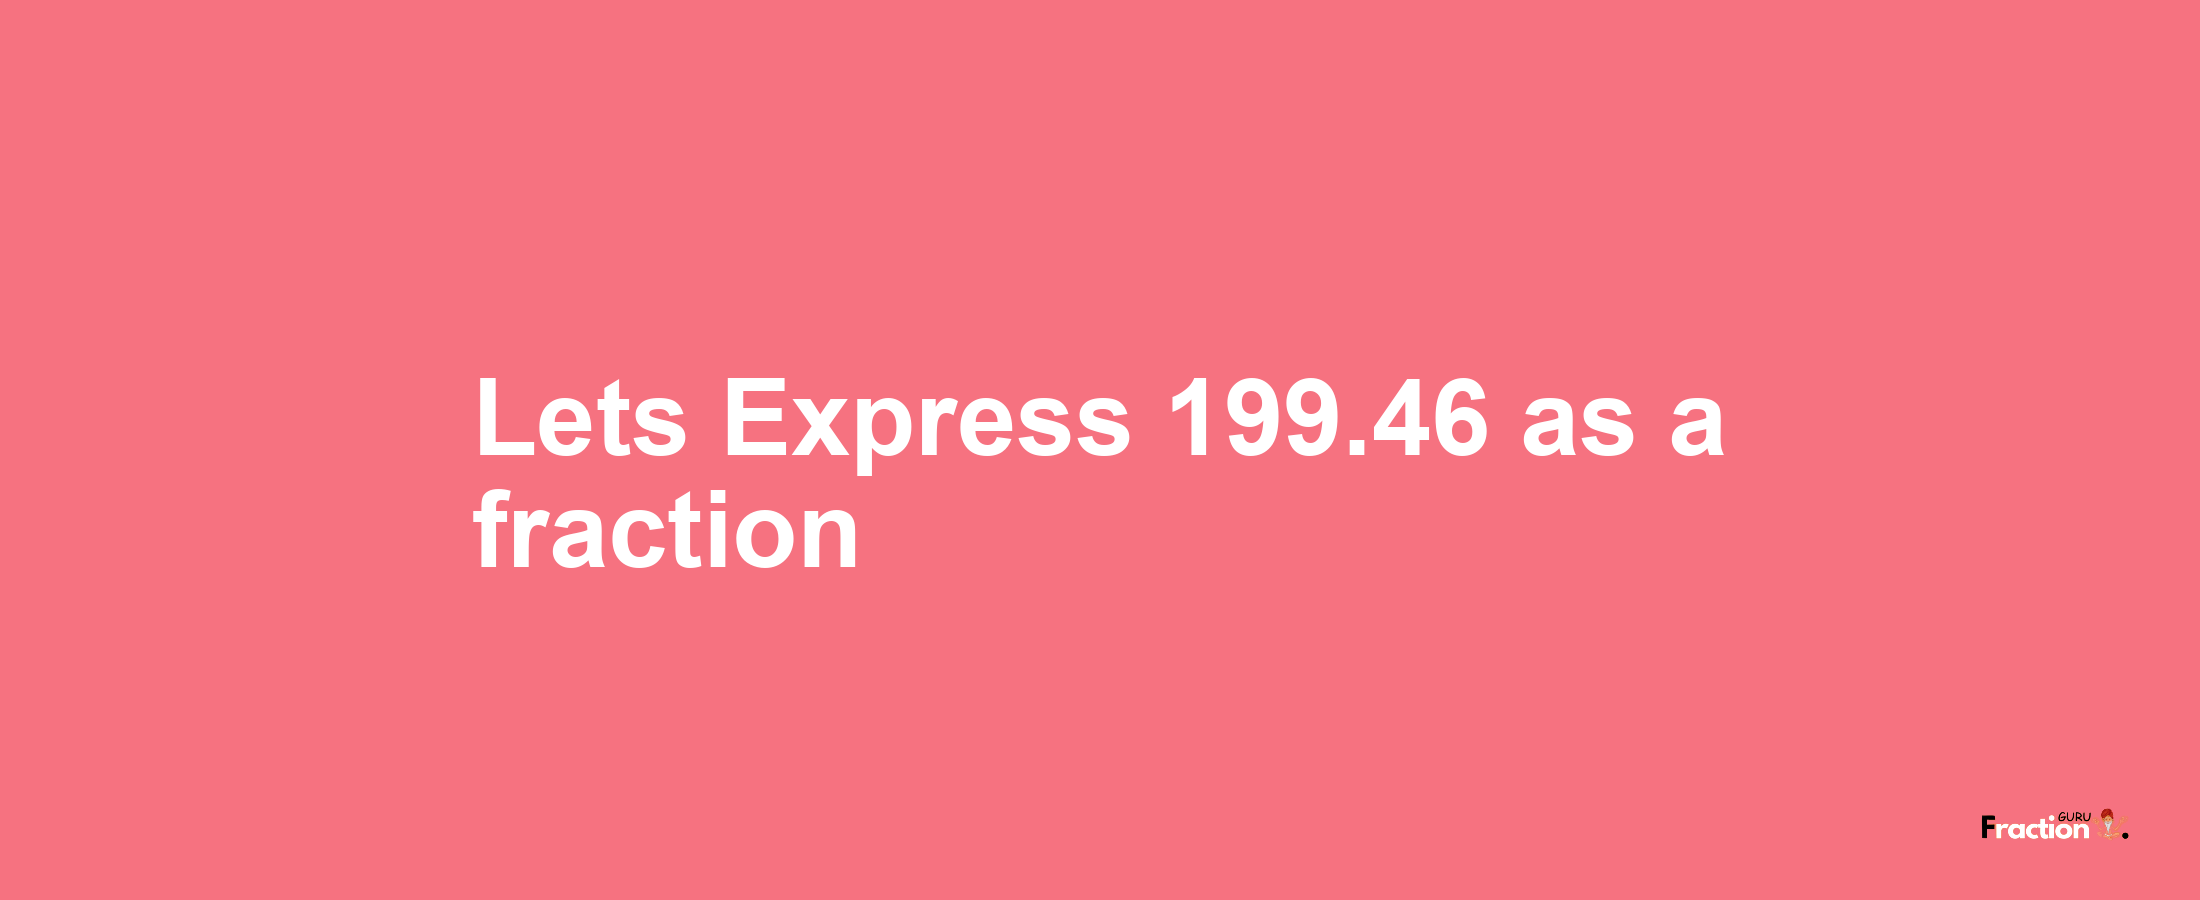 Lets Express 199.46 as afraction